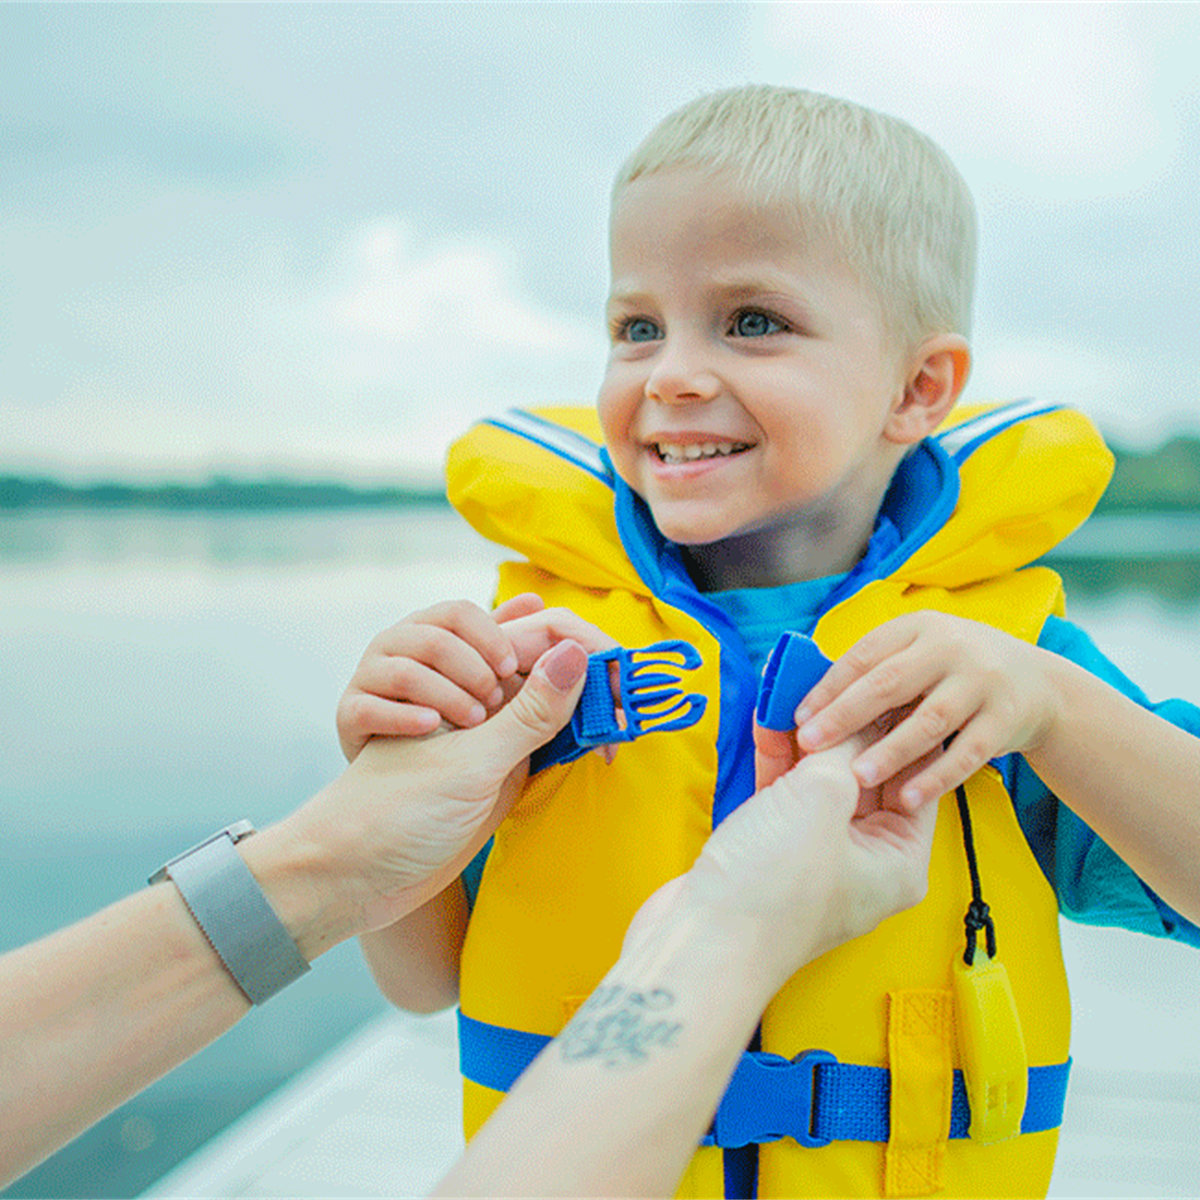 Drowning Prevention for Curious Toddlers: What Parents Need to Know